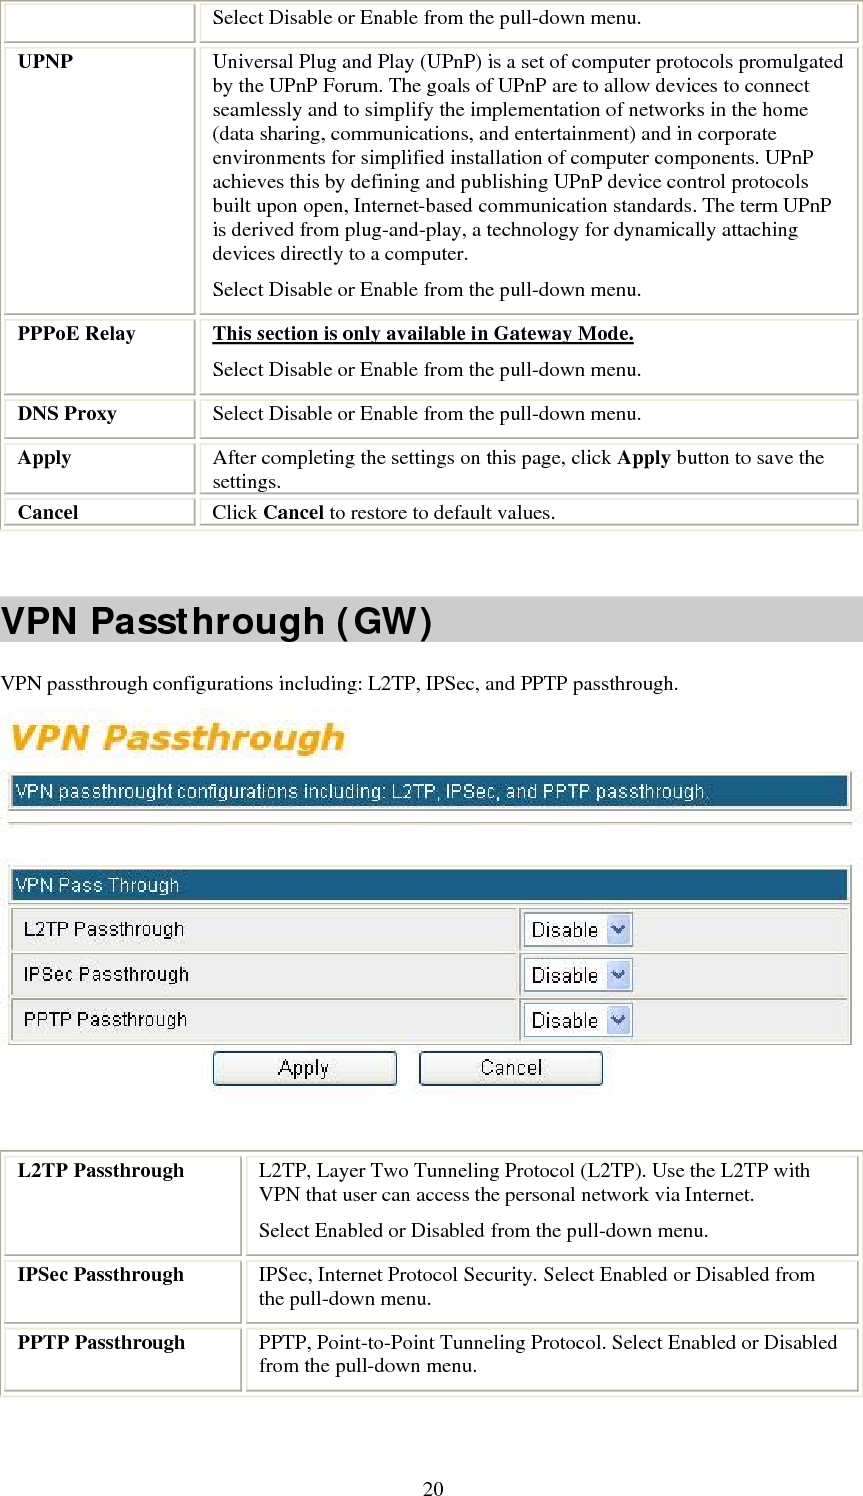   20Select Disable or Enable from the pull-down menu. UPNP  Universal Plug and Play (UPnP) is a set of computer protocols promulgated by the UPnP Forum. The goals of UPnP are to allow devices to connect seamlessly and to simplify the implementation of networks in the home (data sharing, communications, and entertainment) and in corporate environments for simplified installation of computer components. UPnP achieves this by defining and publishing UPnP device control protocols built upon open, Internet-based communication standards. The term UPnP is derived from plug-and-play, a technology for dynamically attaching devices directly to a computer. Select Disable or Enable from the pull-down menu. PPPoE Relay  This section is only available in Gateway Mode. Select Disable or Enable from the pull-down menu. DNS Proxy  Select Disable or Enable from the pull-down menu. Apply  After completing the settings on this page, click Apply button to save the settings. Cancel  Click Cancel to restore to default values.  VPN Passthrough (GW) VPN passthrough configurations including: L2TP, IPSec, and PPTP passthrough.   L2TP Passthrough  L2TP, Layer Two Tunneling Protocol (L2TP). Use the L2TP with VPN that user can access the personal network via Internet. Select Enabled or Disabled from the pull-down menu. IPSec Passthrough  IPSec, Internet Protocol Security. Select Enabled or Disabled from the pull-down menu. PPTP Passthrough  PPTP, Point-to-Point Tunneling Protocol. Select Enabled or Disabled from the pull-down menu.   